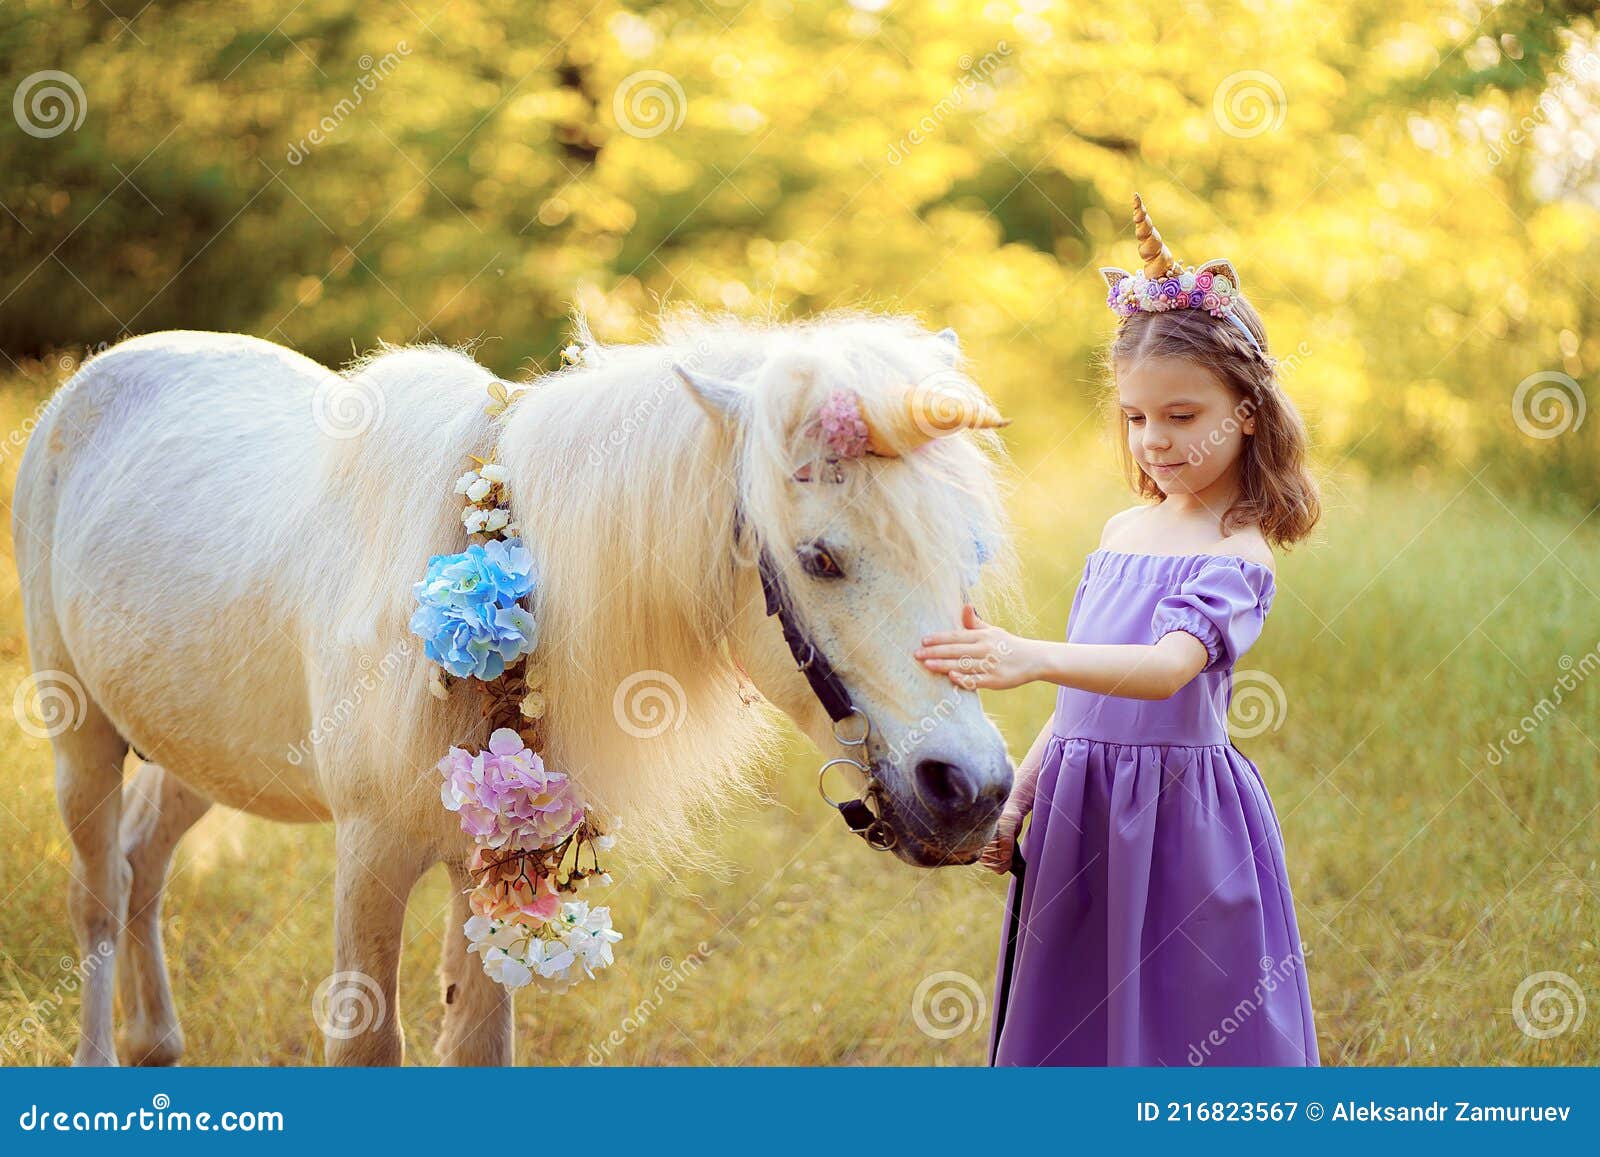 Girl in Purple Dress with Wreath of a Unicorn in Hair Hugging Wh Stock  Image - Image of background, cute: 216823567